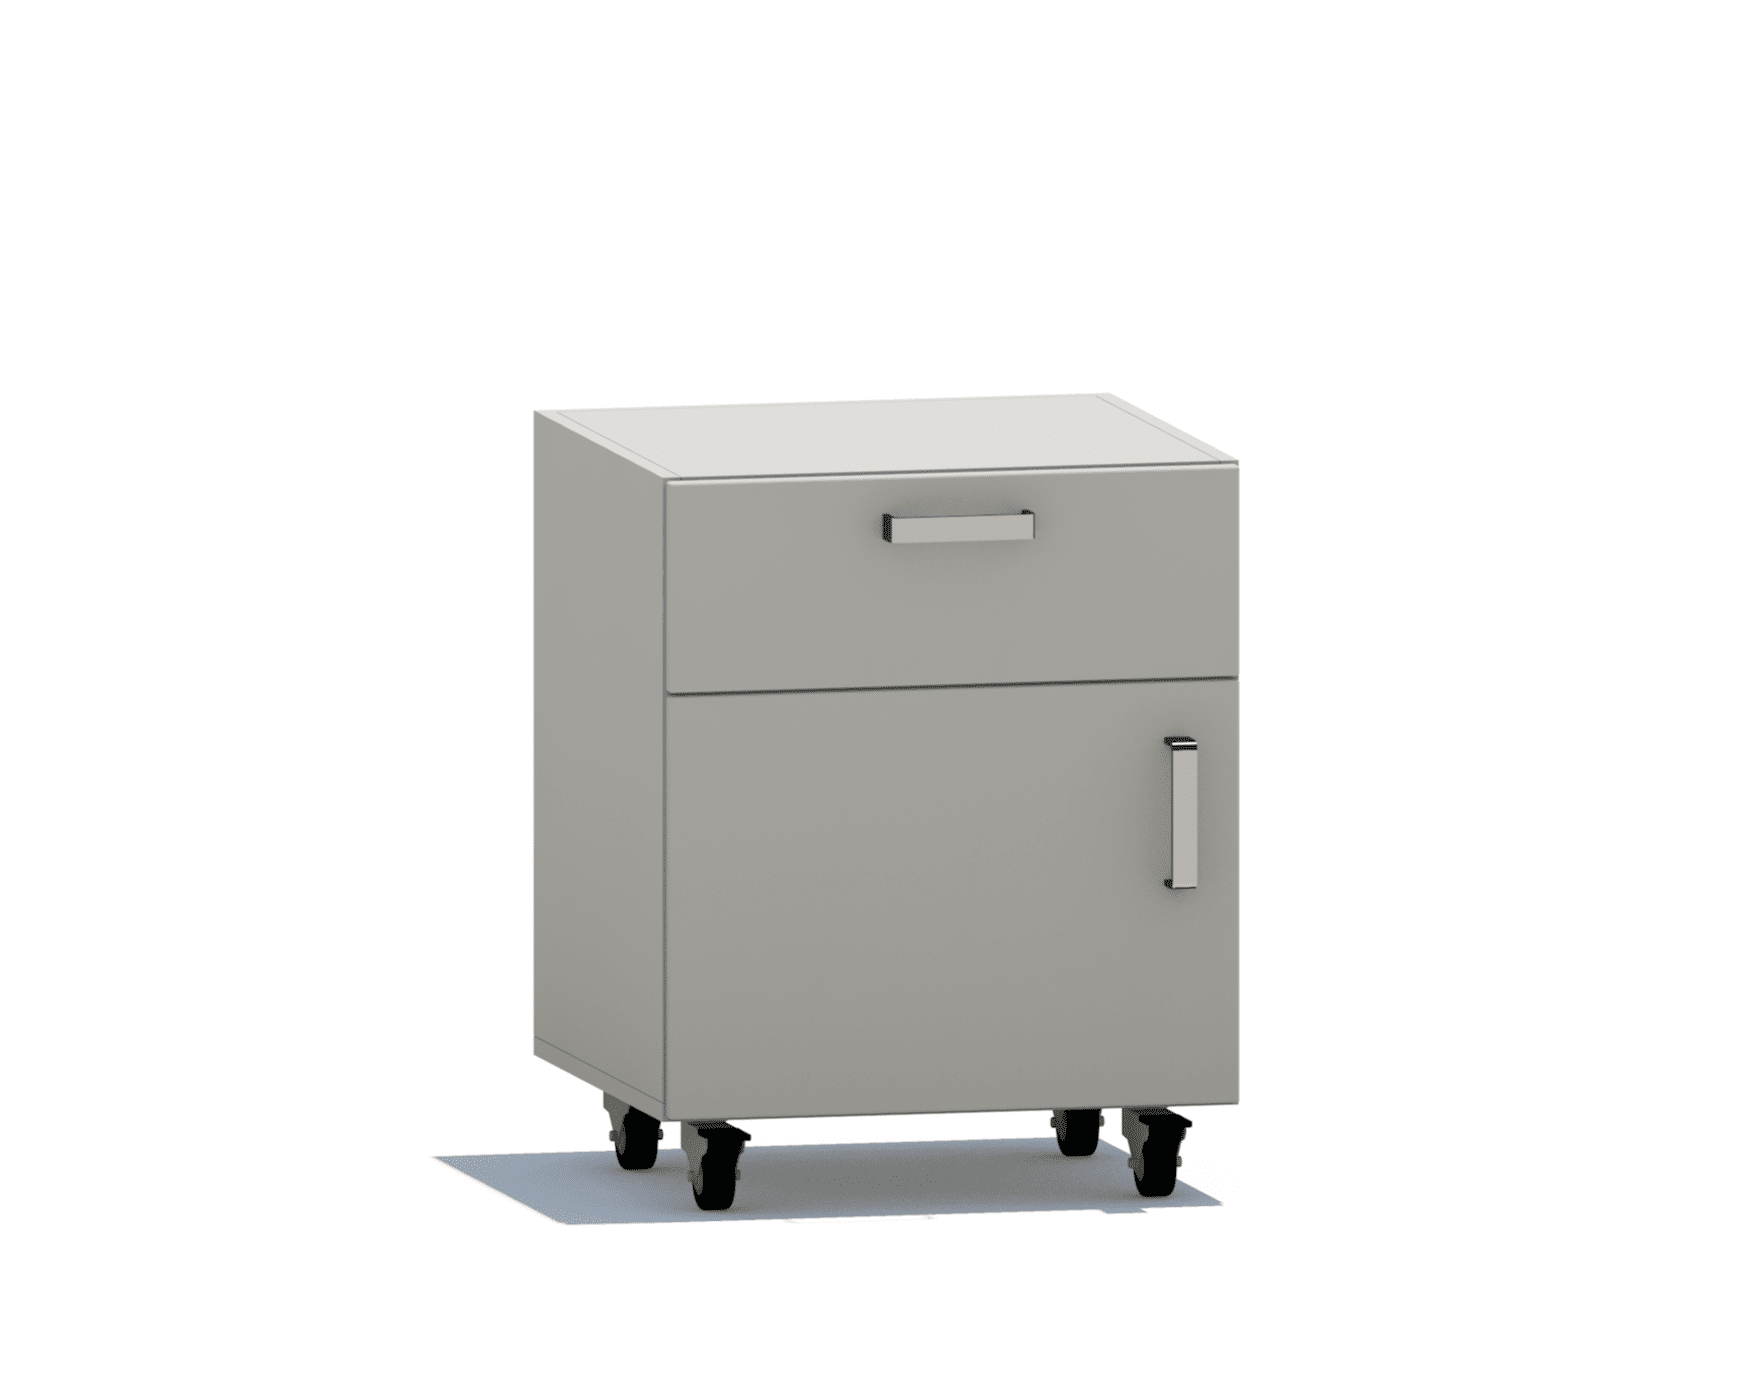 Combo Storage Unit Workstations omnilabsolutions 24 wide No 